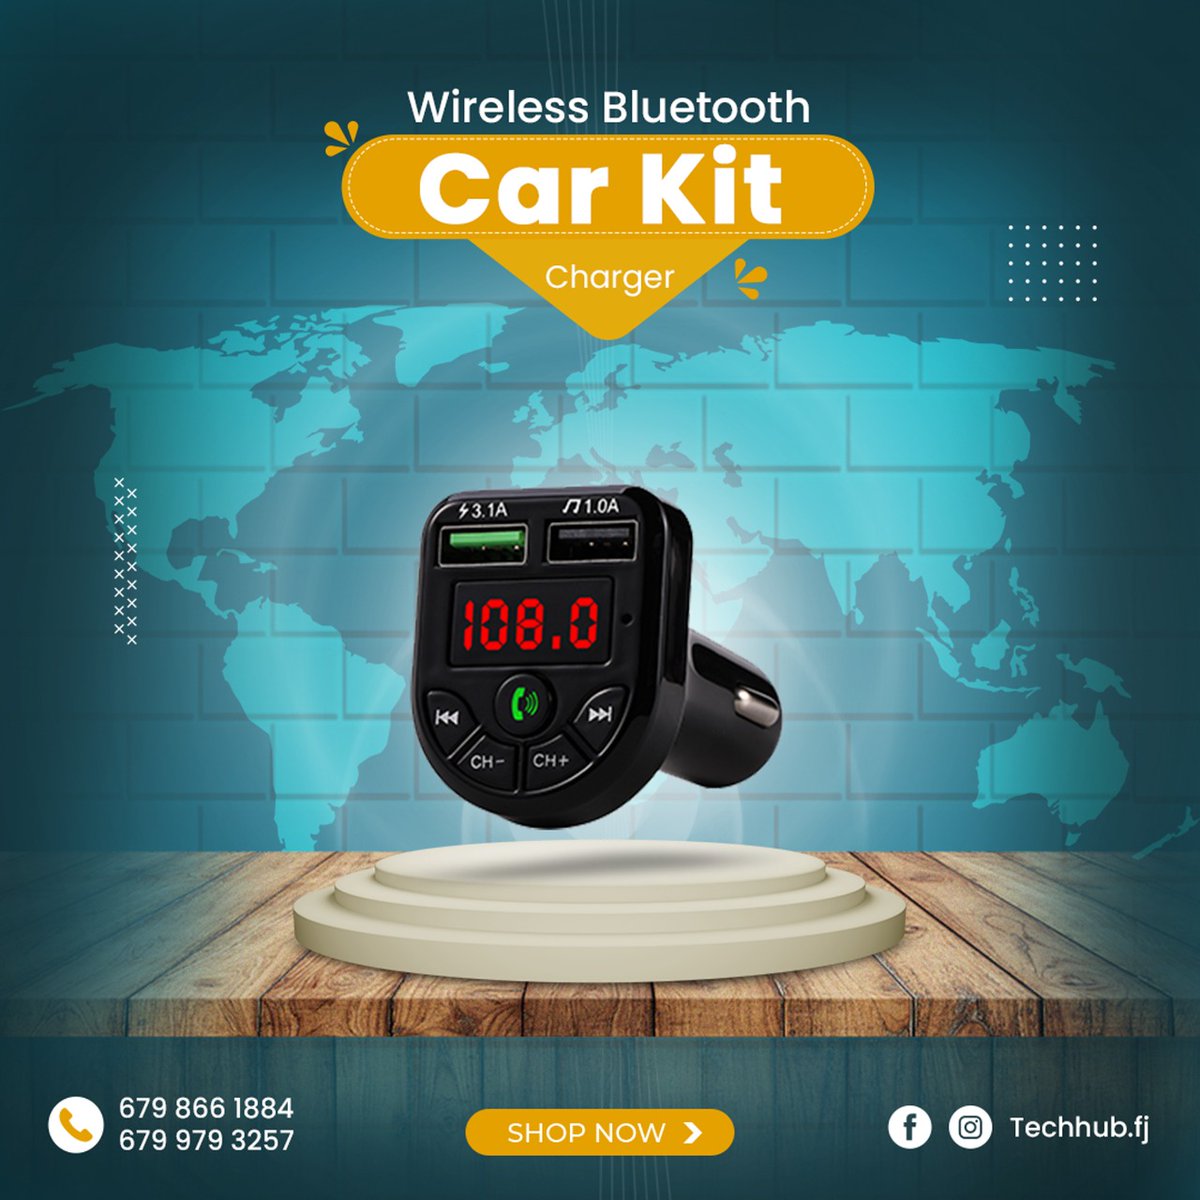 Be safer on the Road with hands free wireless bluetooth Car kits 💯✅
Price: $19.95

Shop Here: techhubelectronics.com

☎️Contact: 9793257 Viber/8661884

#bluetoothcarkit #carbluetooth #motor #racing #cars #instacar #carcharger #car  #cargadgets #bluetoothcar #Wireless